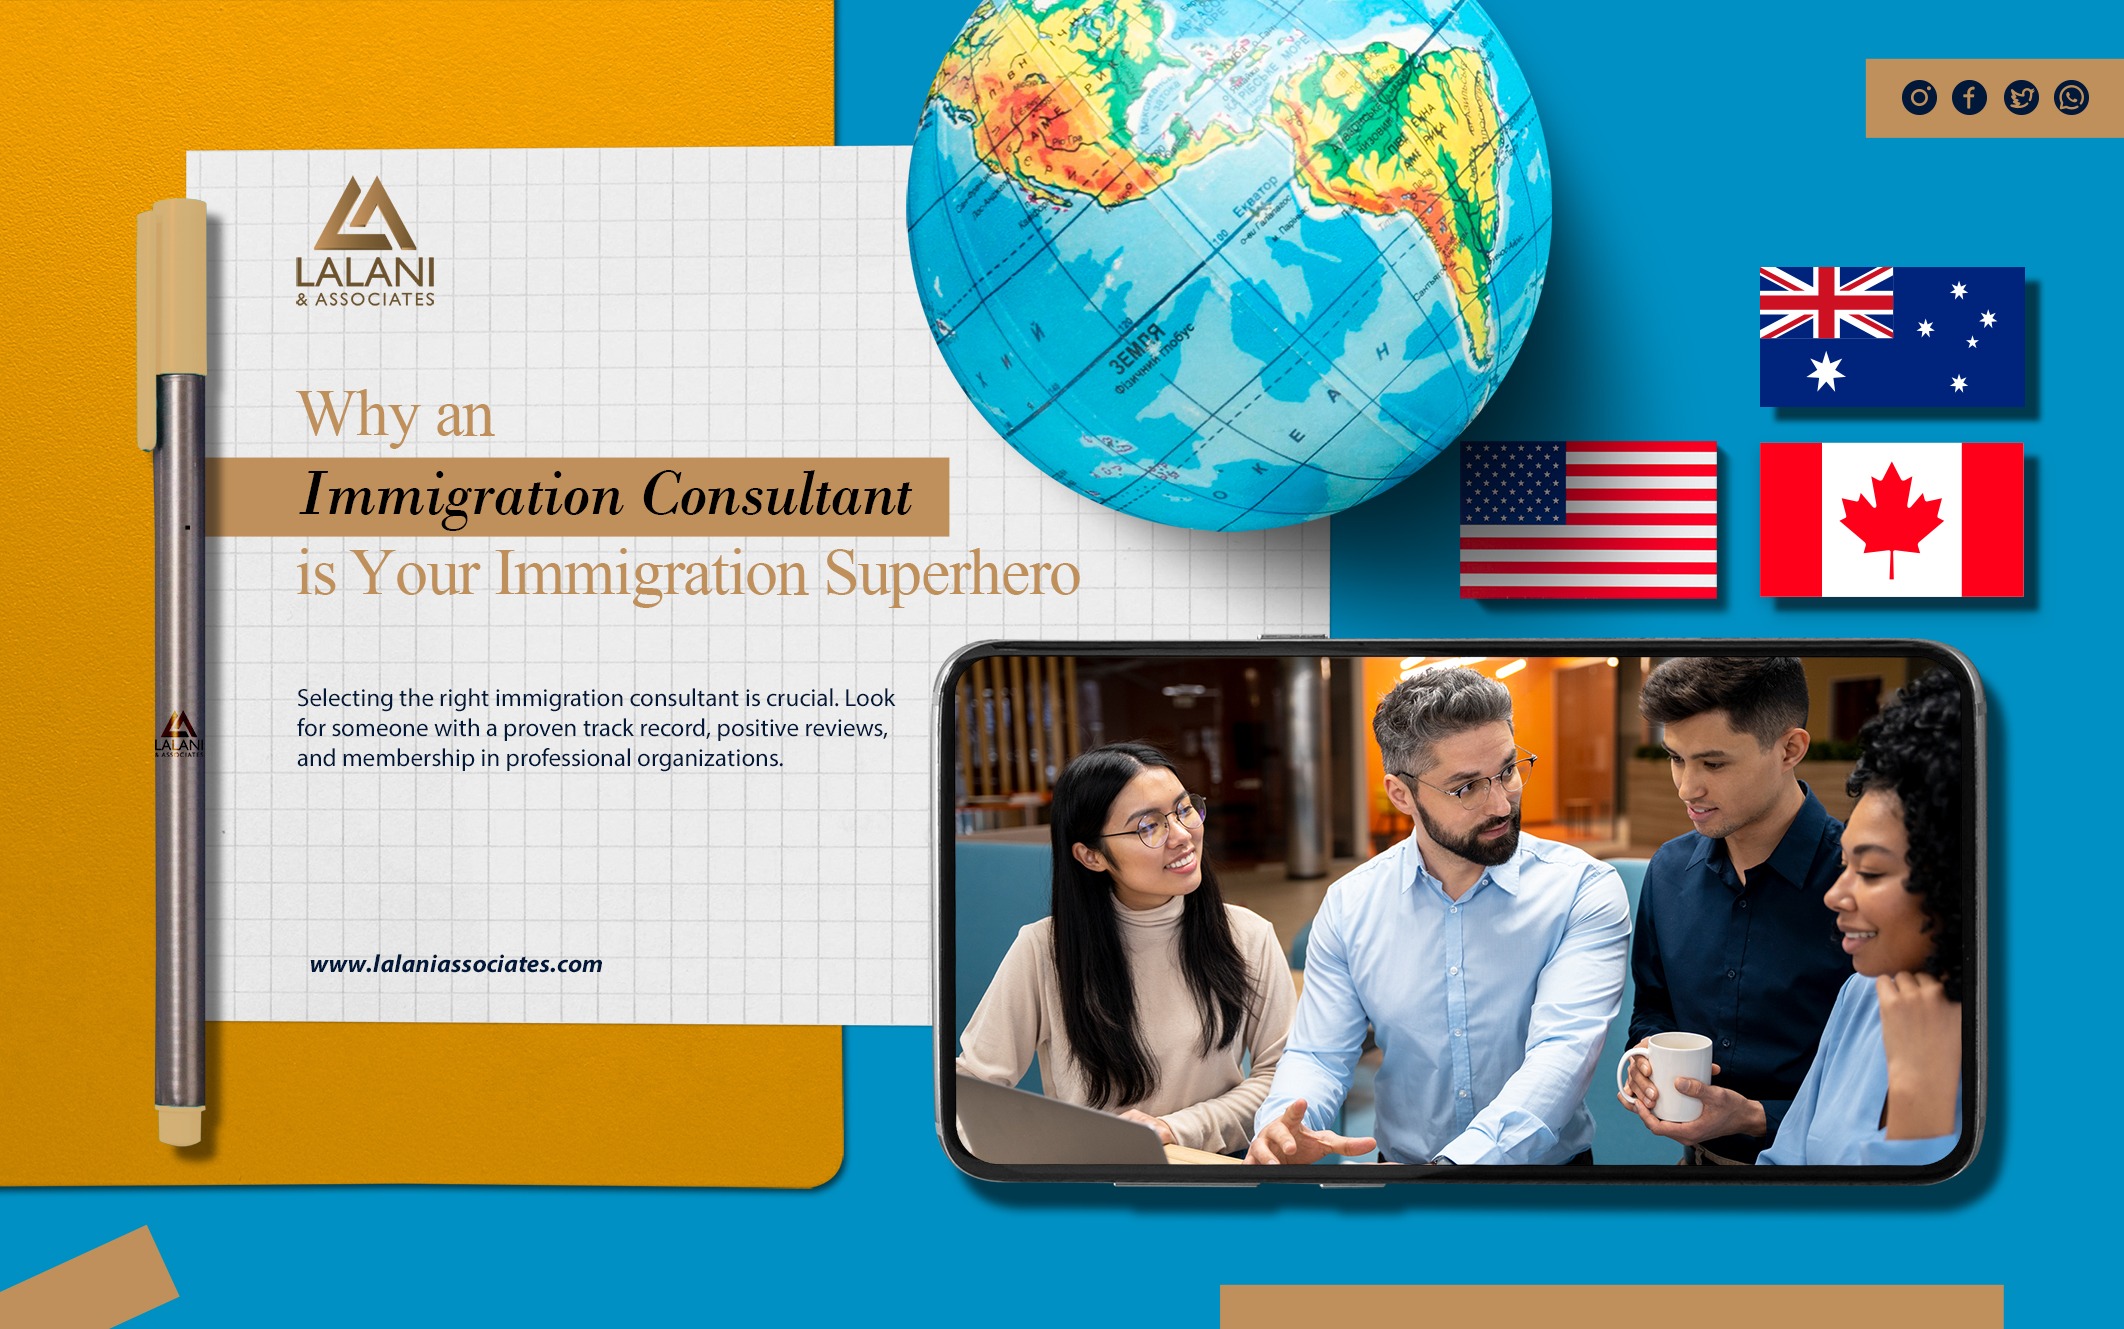 Why an Immigration Consultant is Your Immigration Superhero